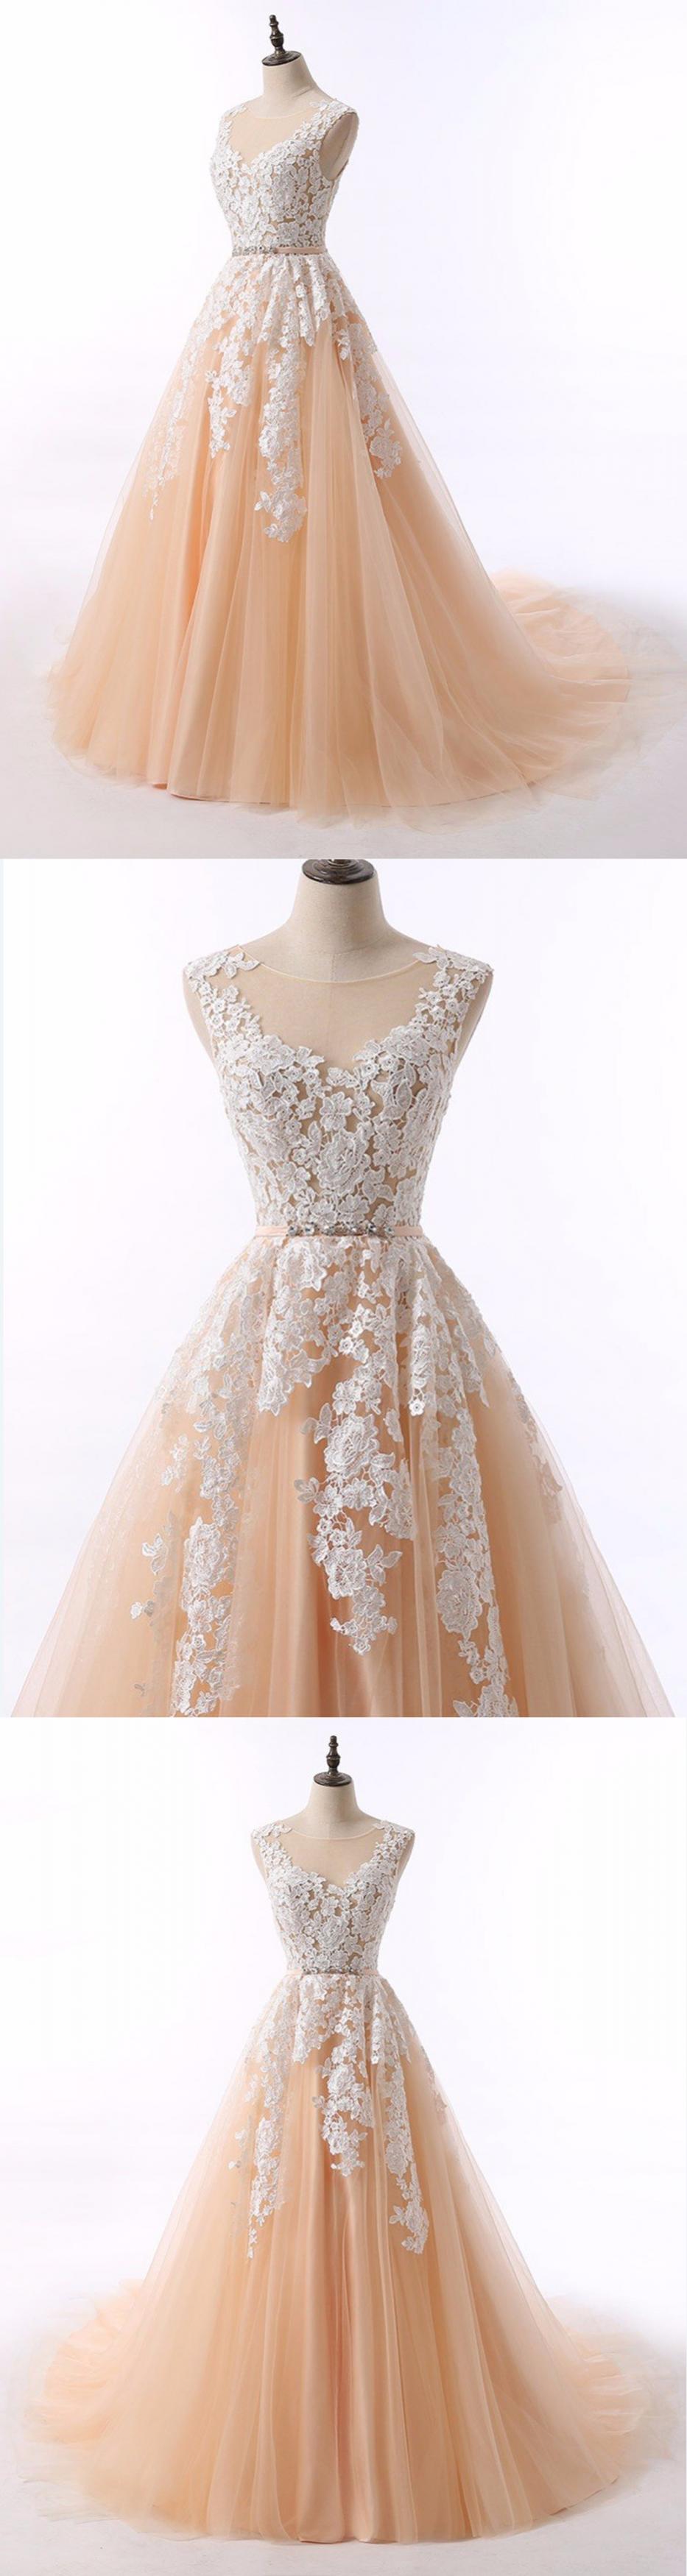 Champagne Tulle Round Neck Long Winter Formal Prom Dress With Lace Applique